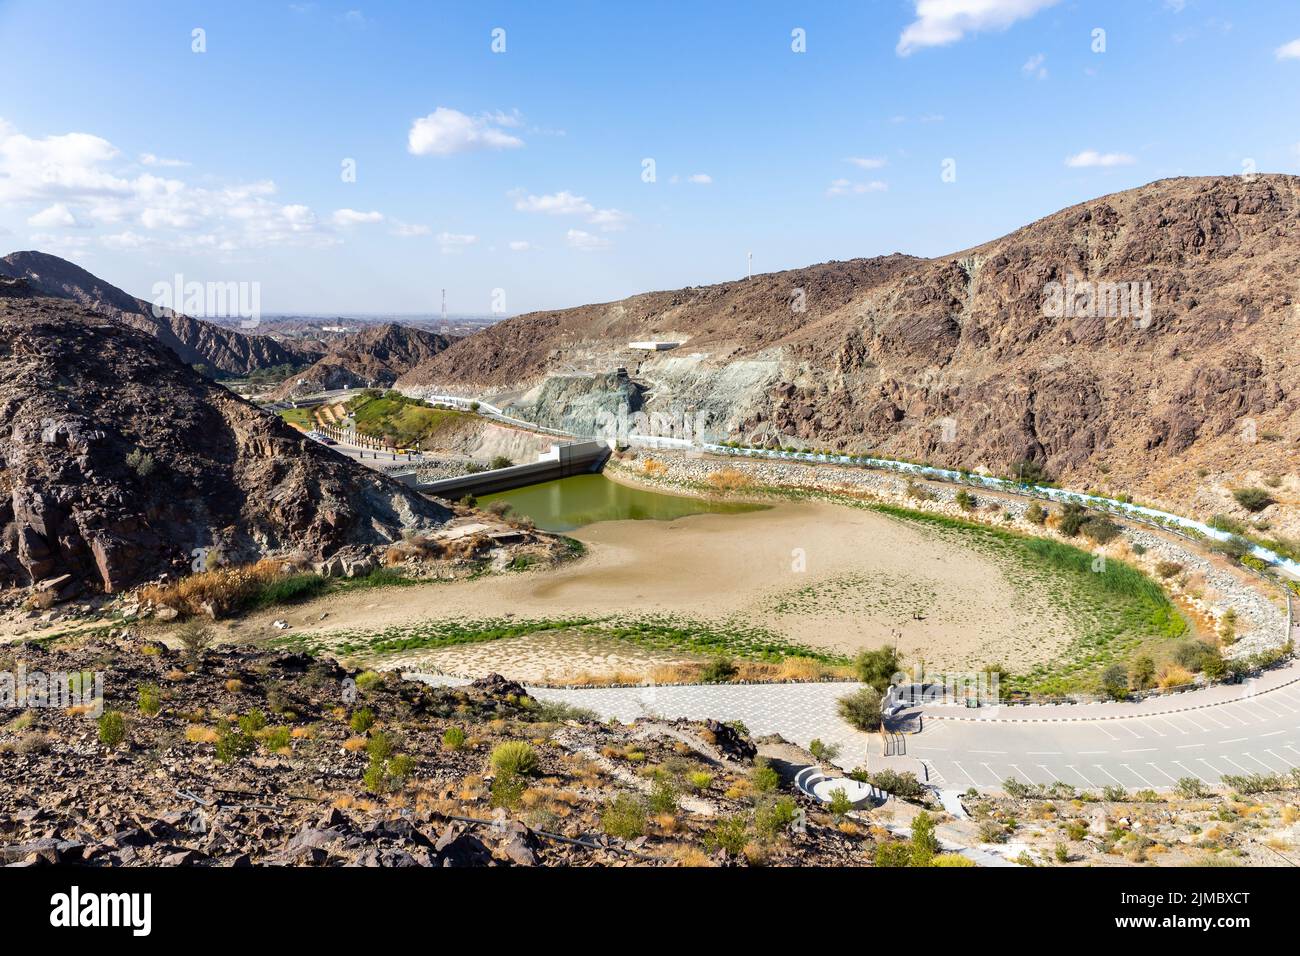 Wadi Shawka Dam, almost empty dam in Hajar Mountains, Ras al Khaimah, United Arab Emirates, with rocky mountains in the background and dry riverbed. Stock Photo